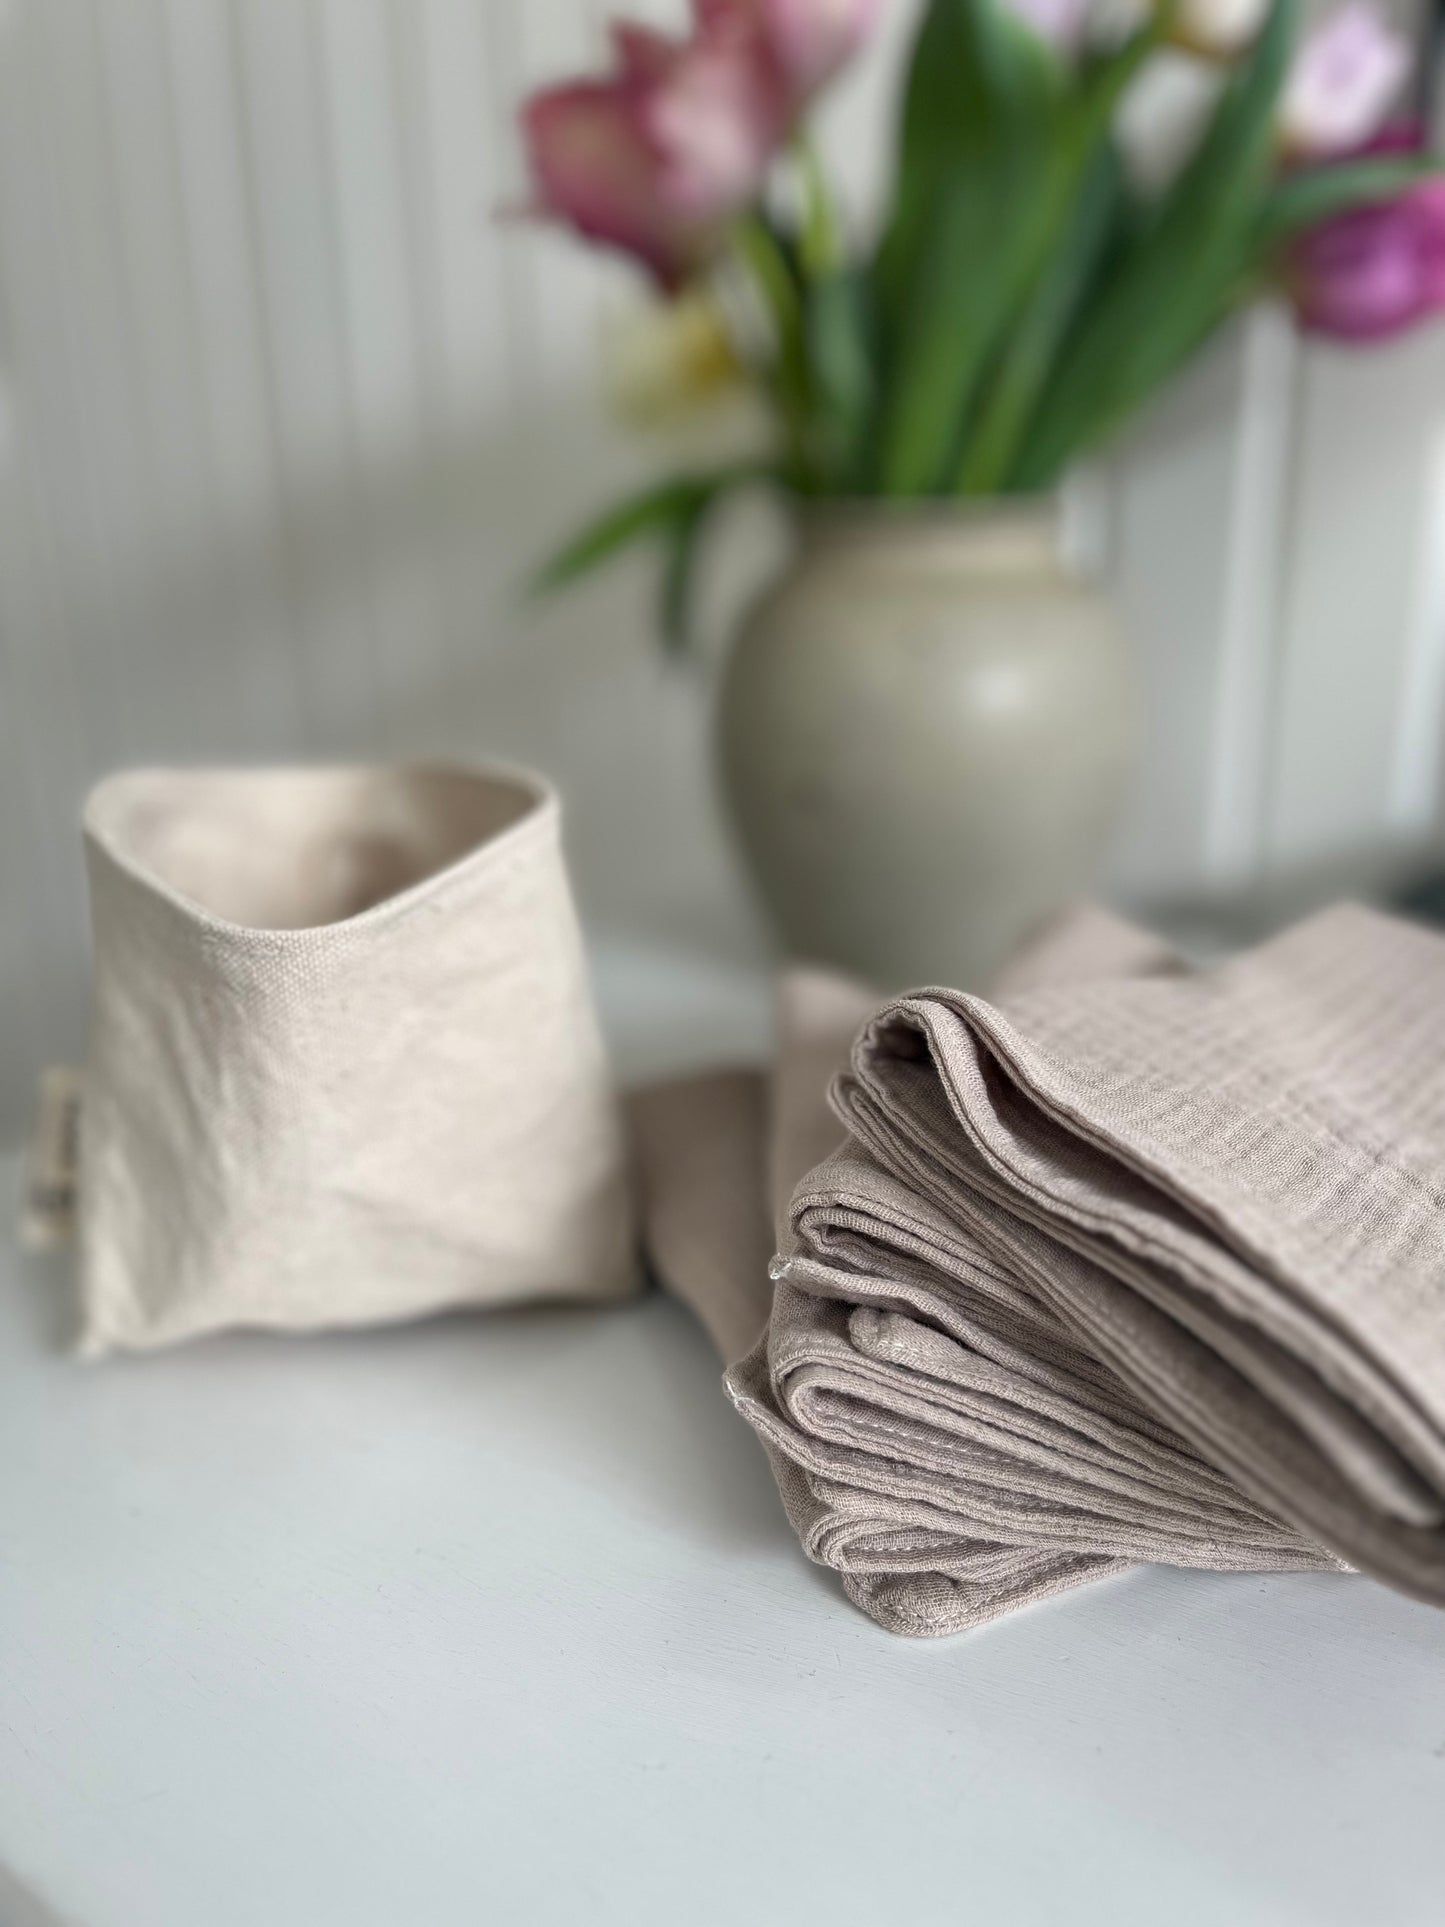 4 organic cotton facial cleansing cloths lay in a stack beside an empty  fabric organizer called The Bucket. A vase of pink tulips is blurred in the background.